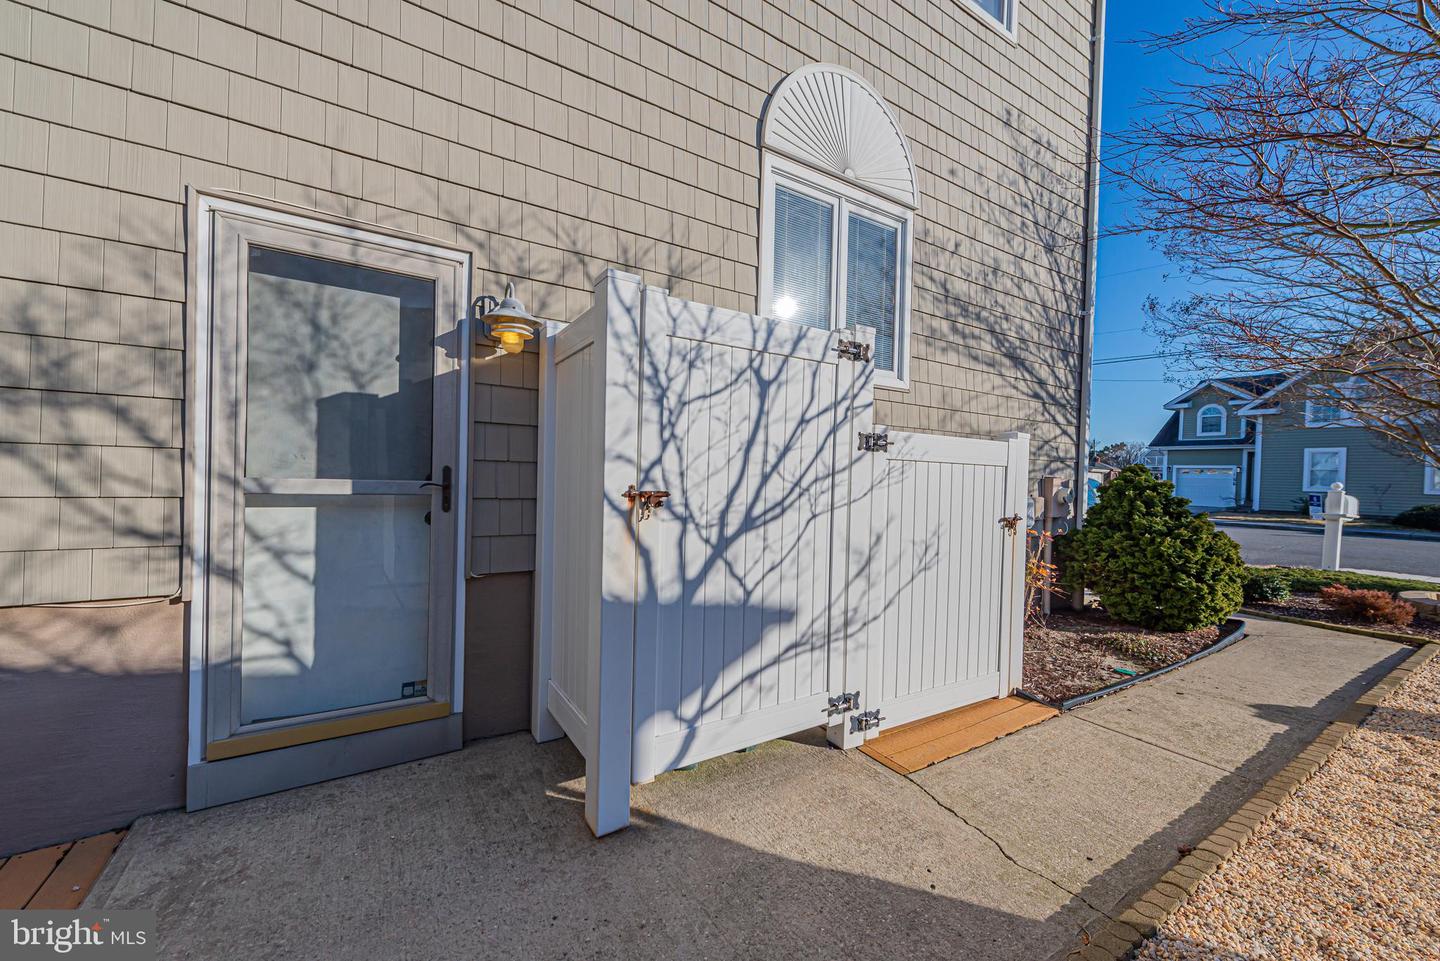 MDWO2019074-802877623564-2024-02-25-13-51-28 154 Old Wharf Rd | Ocean City, MD Real Estate For Sale | MLS# Mdwo2019074  - 1st Choice Properties